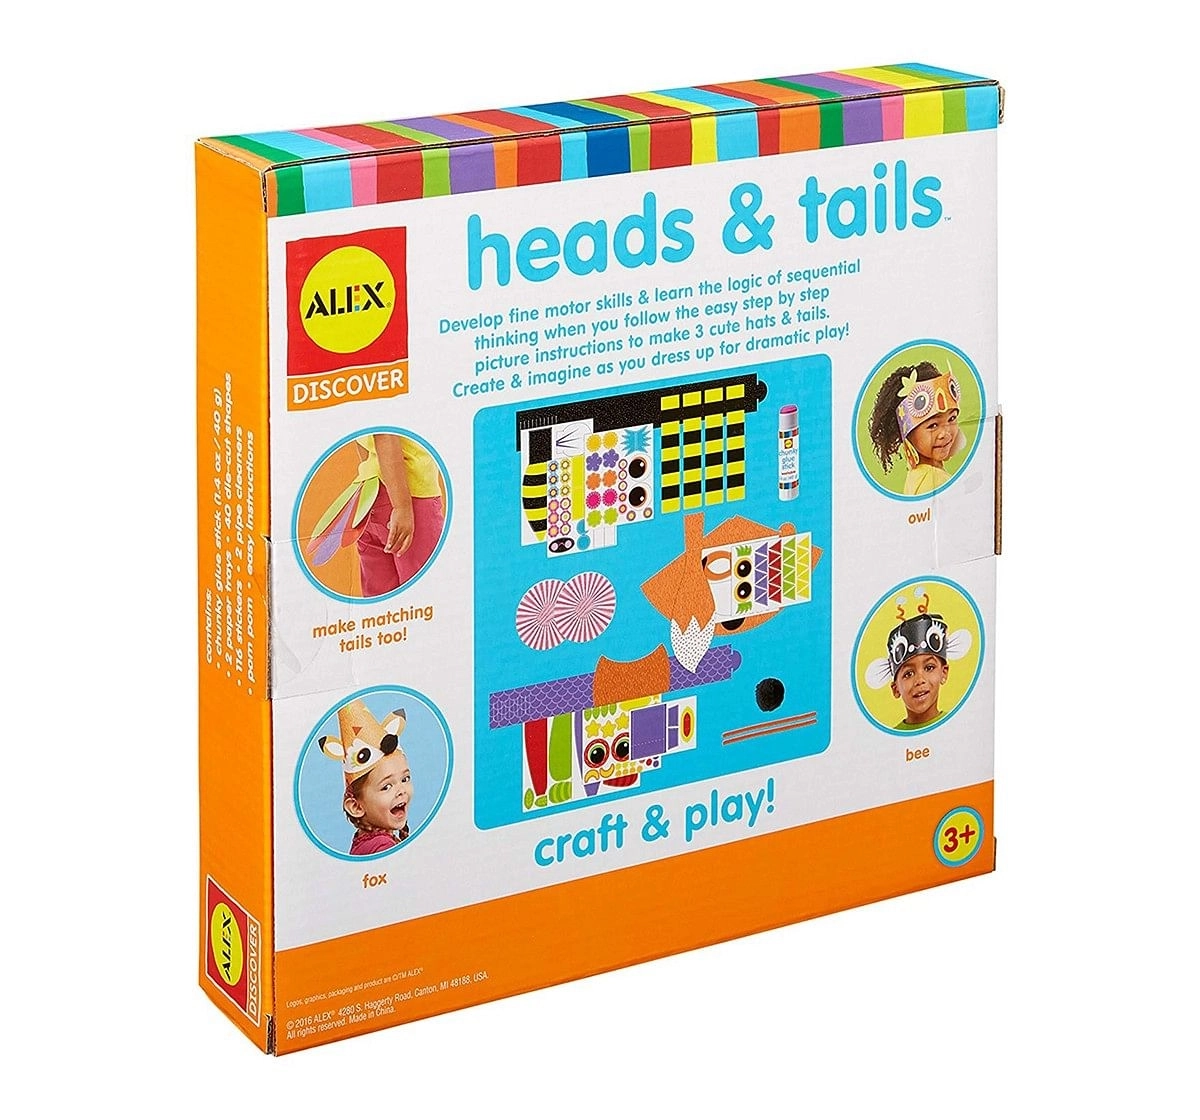 Alex Toys Heads & Tails Novelty DIY Art & Craft Kits for Kids age 3Y+ 